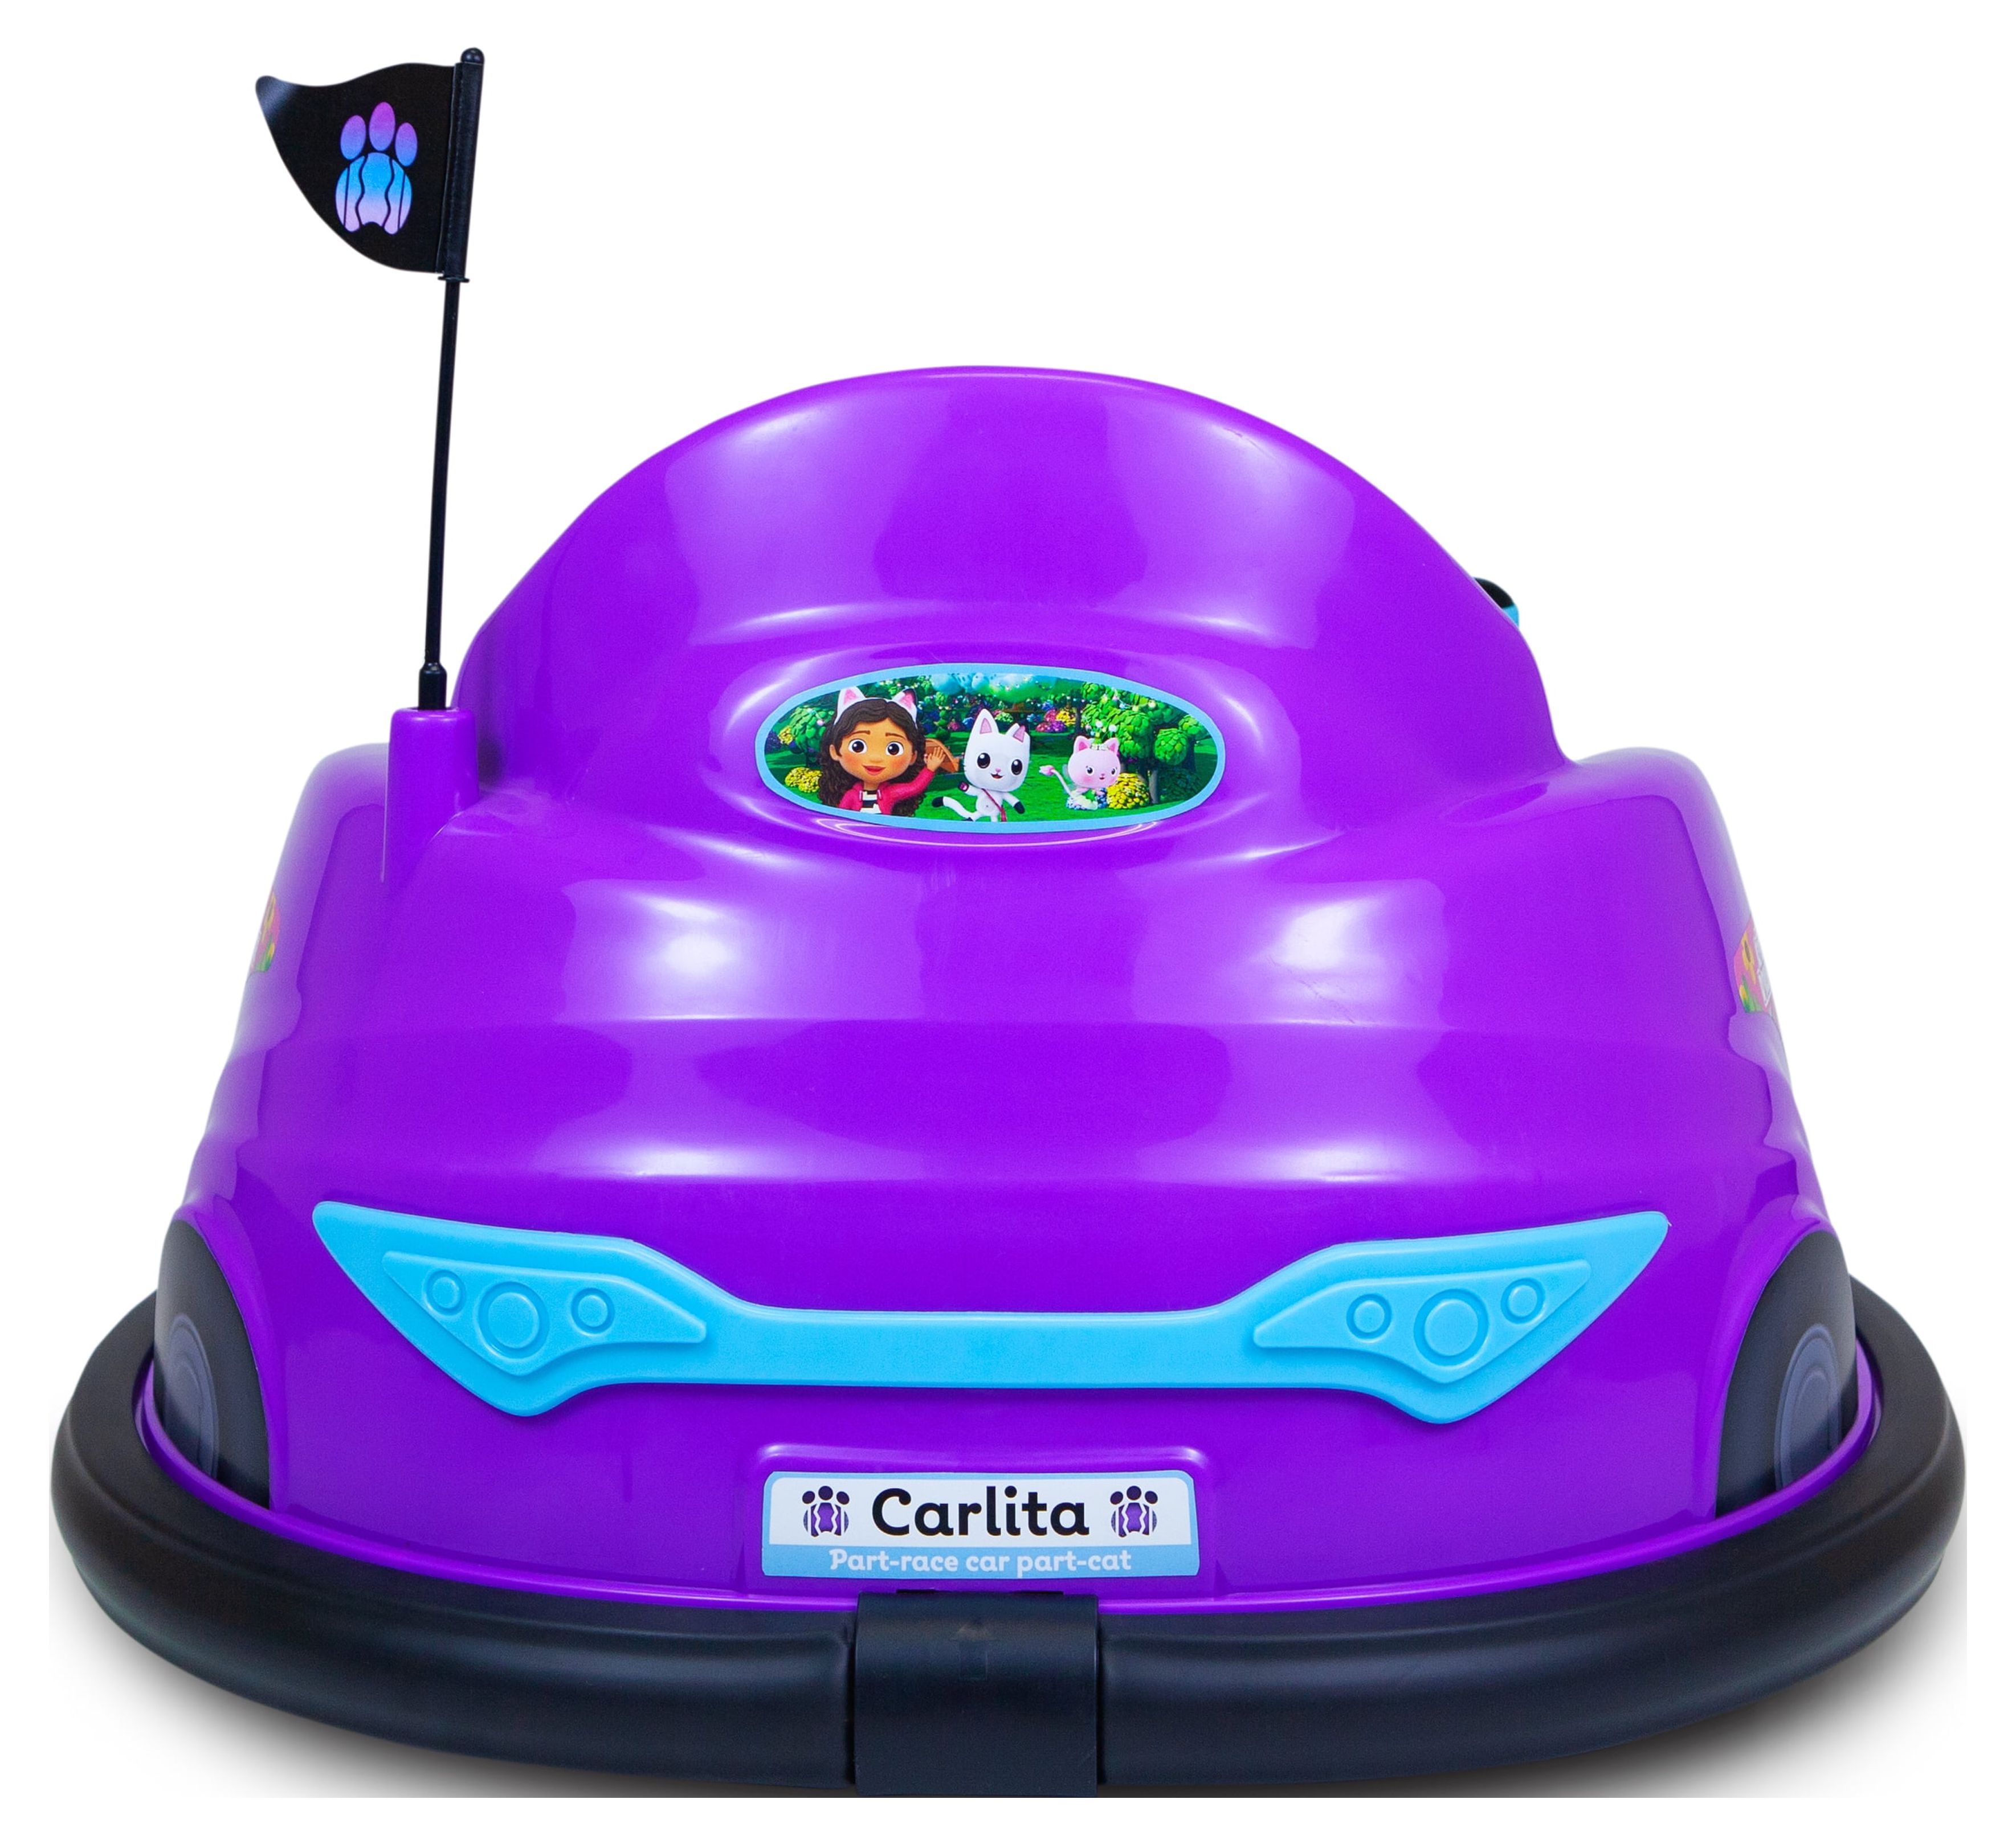 Gabby's Dollhouse 6 Volts Bumper Car, Battery Powered Ride on, Fun LED Lights, Charger, Ages 1.5 - 4 Years, for Boys and Girls - image 7 of 9